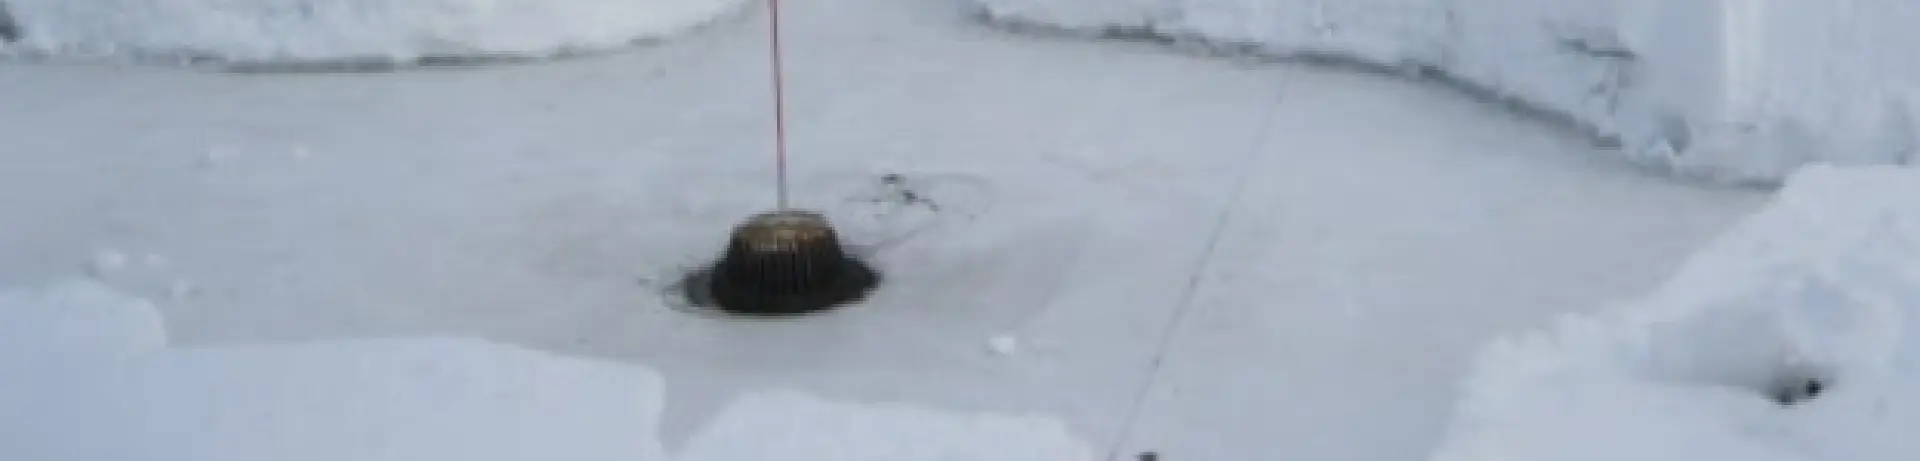 A roof drain with a pole sticking out.  Ice and snow are surrounding the drain.